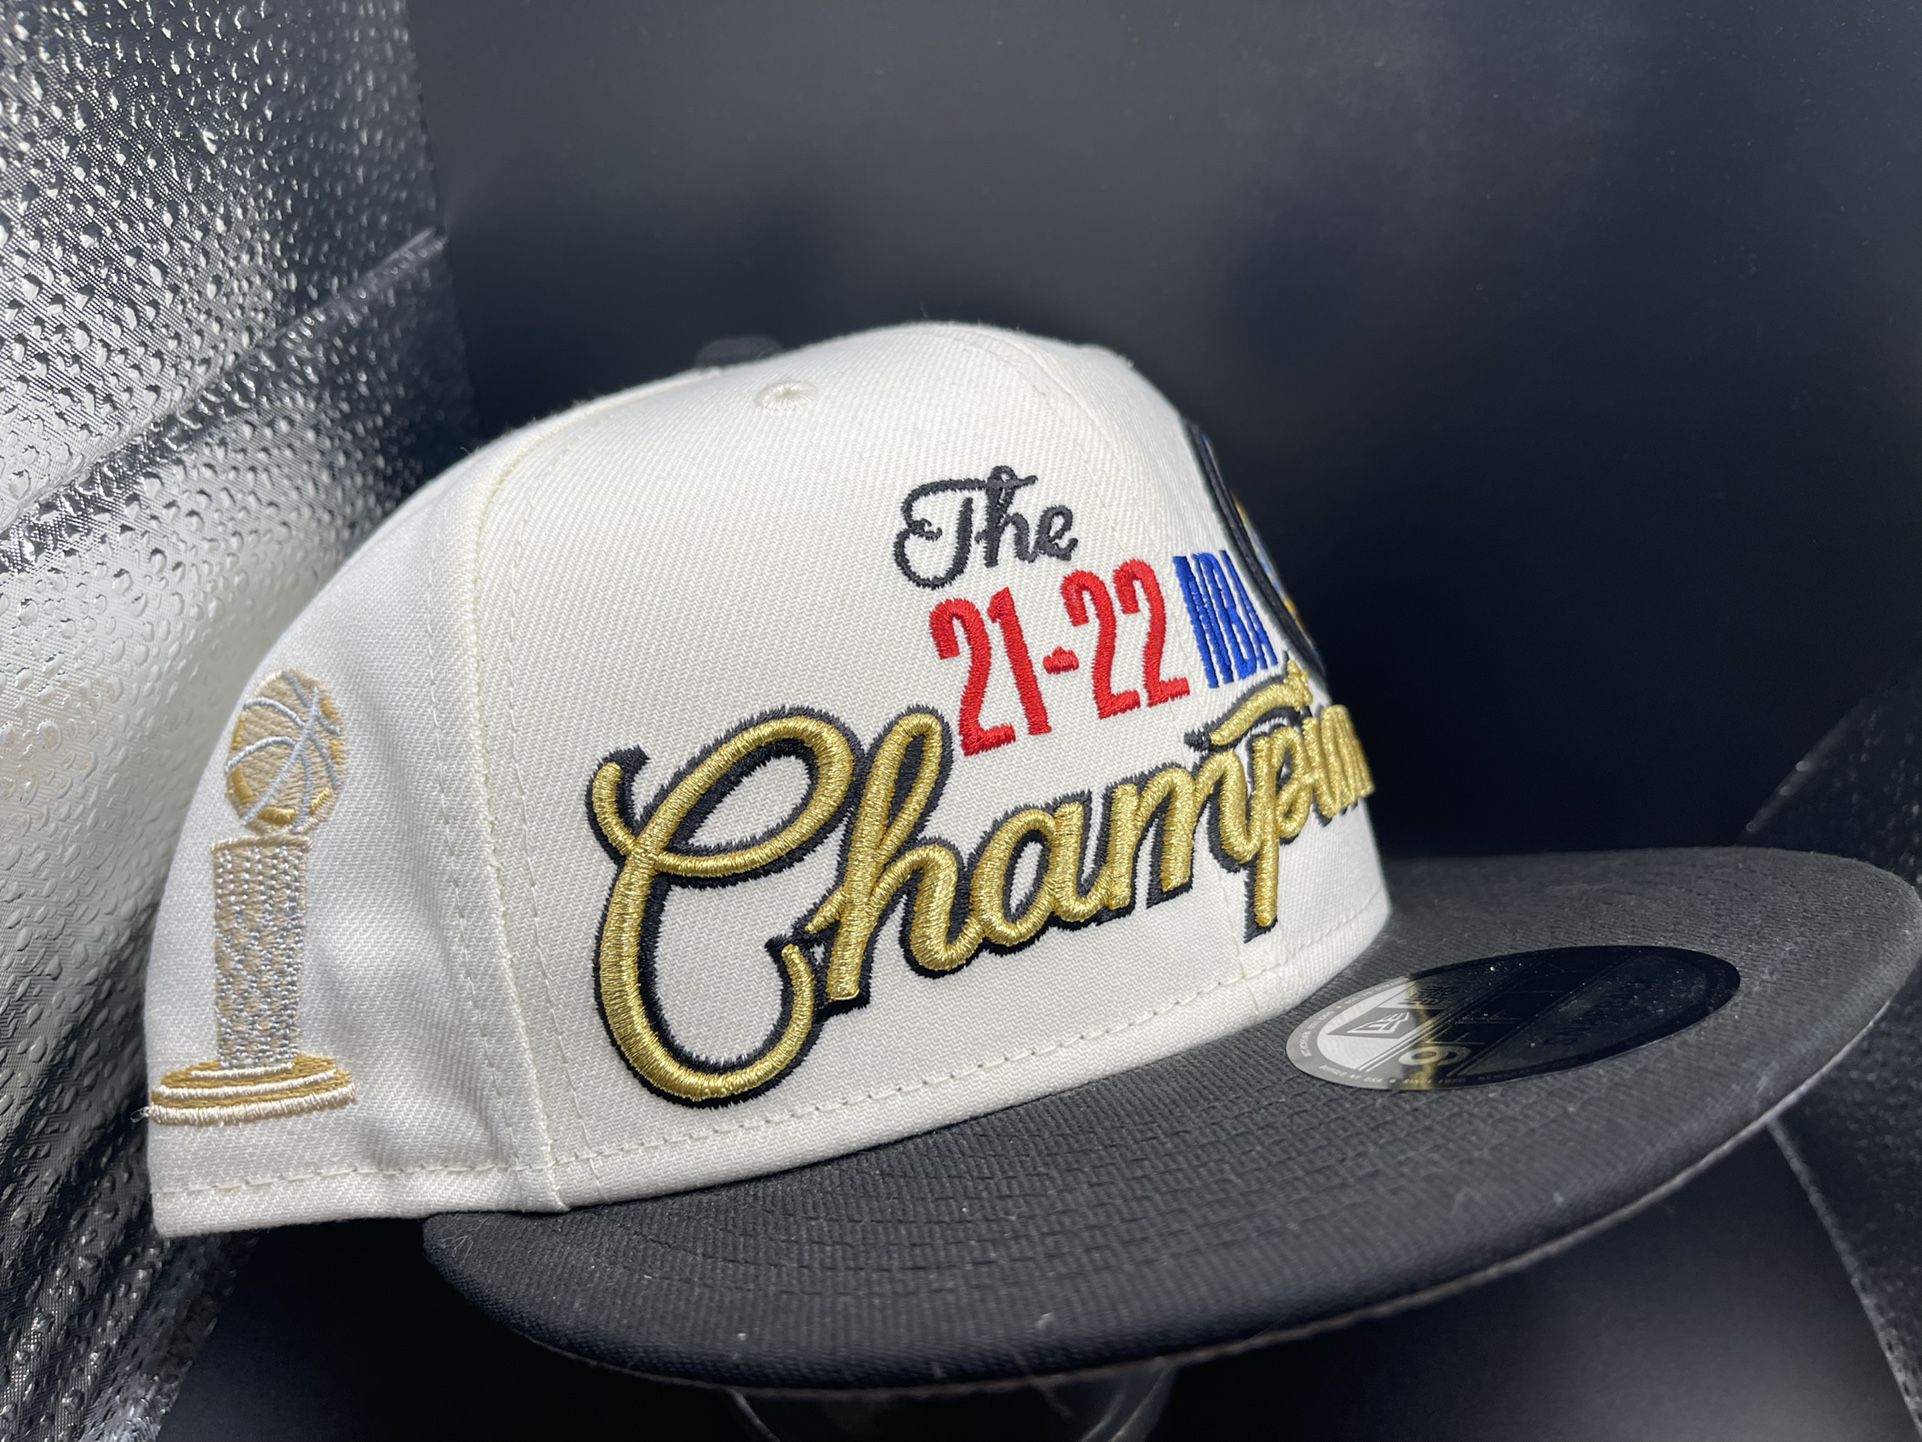 2021-2022 NBA Champions hat for Sale in San Francisco, CA